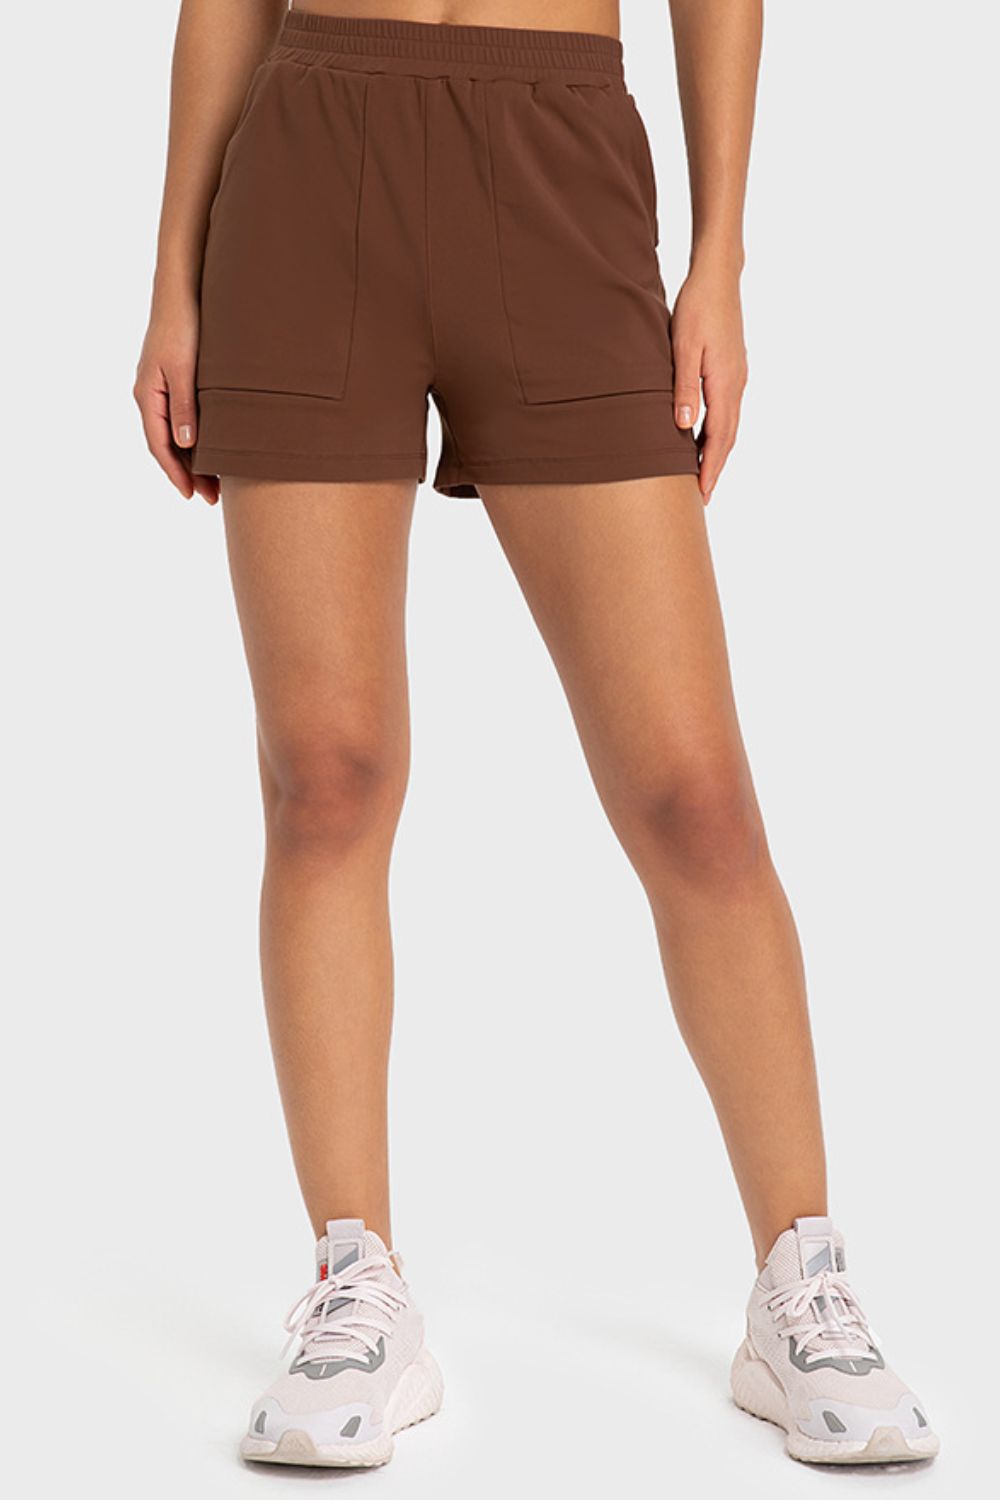 Elastic Waist Sports Shorts with Pockets - Short Leggings - FITGGINS